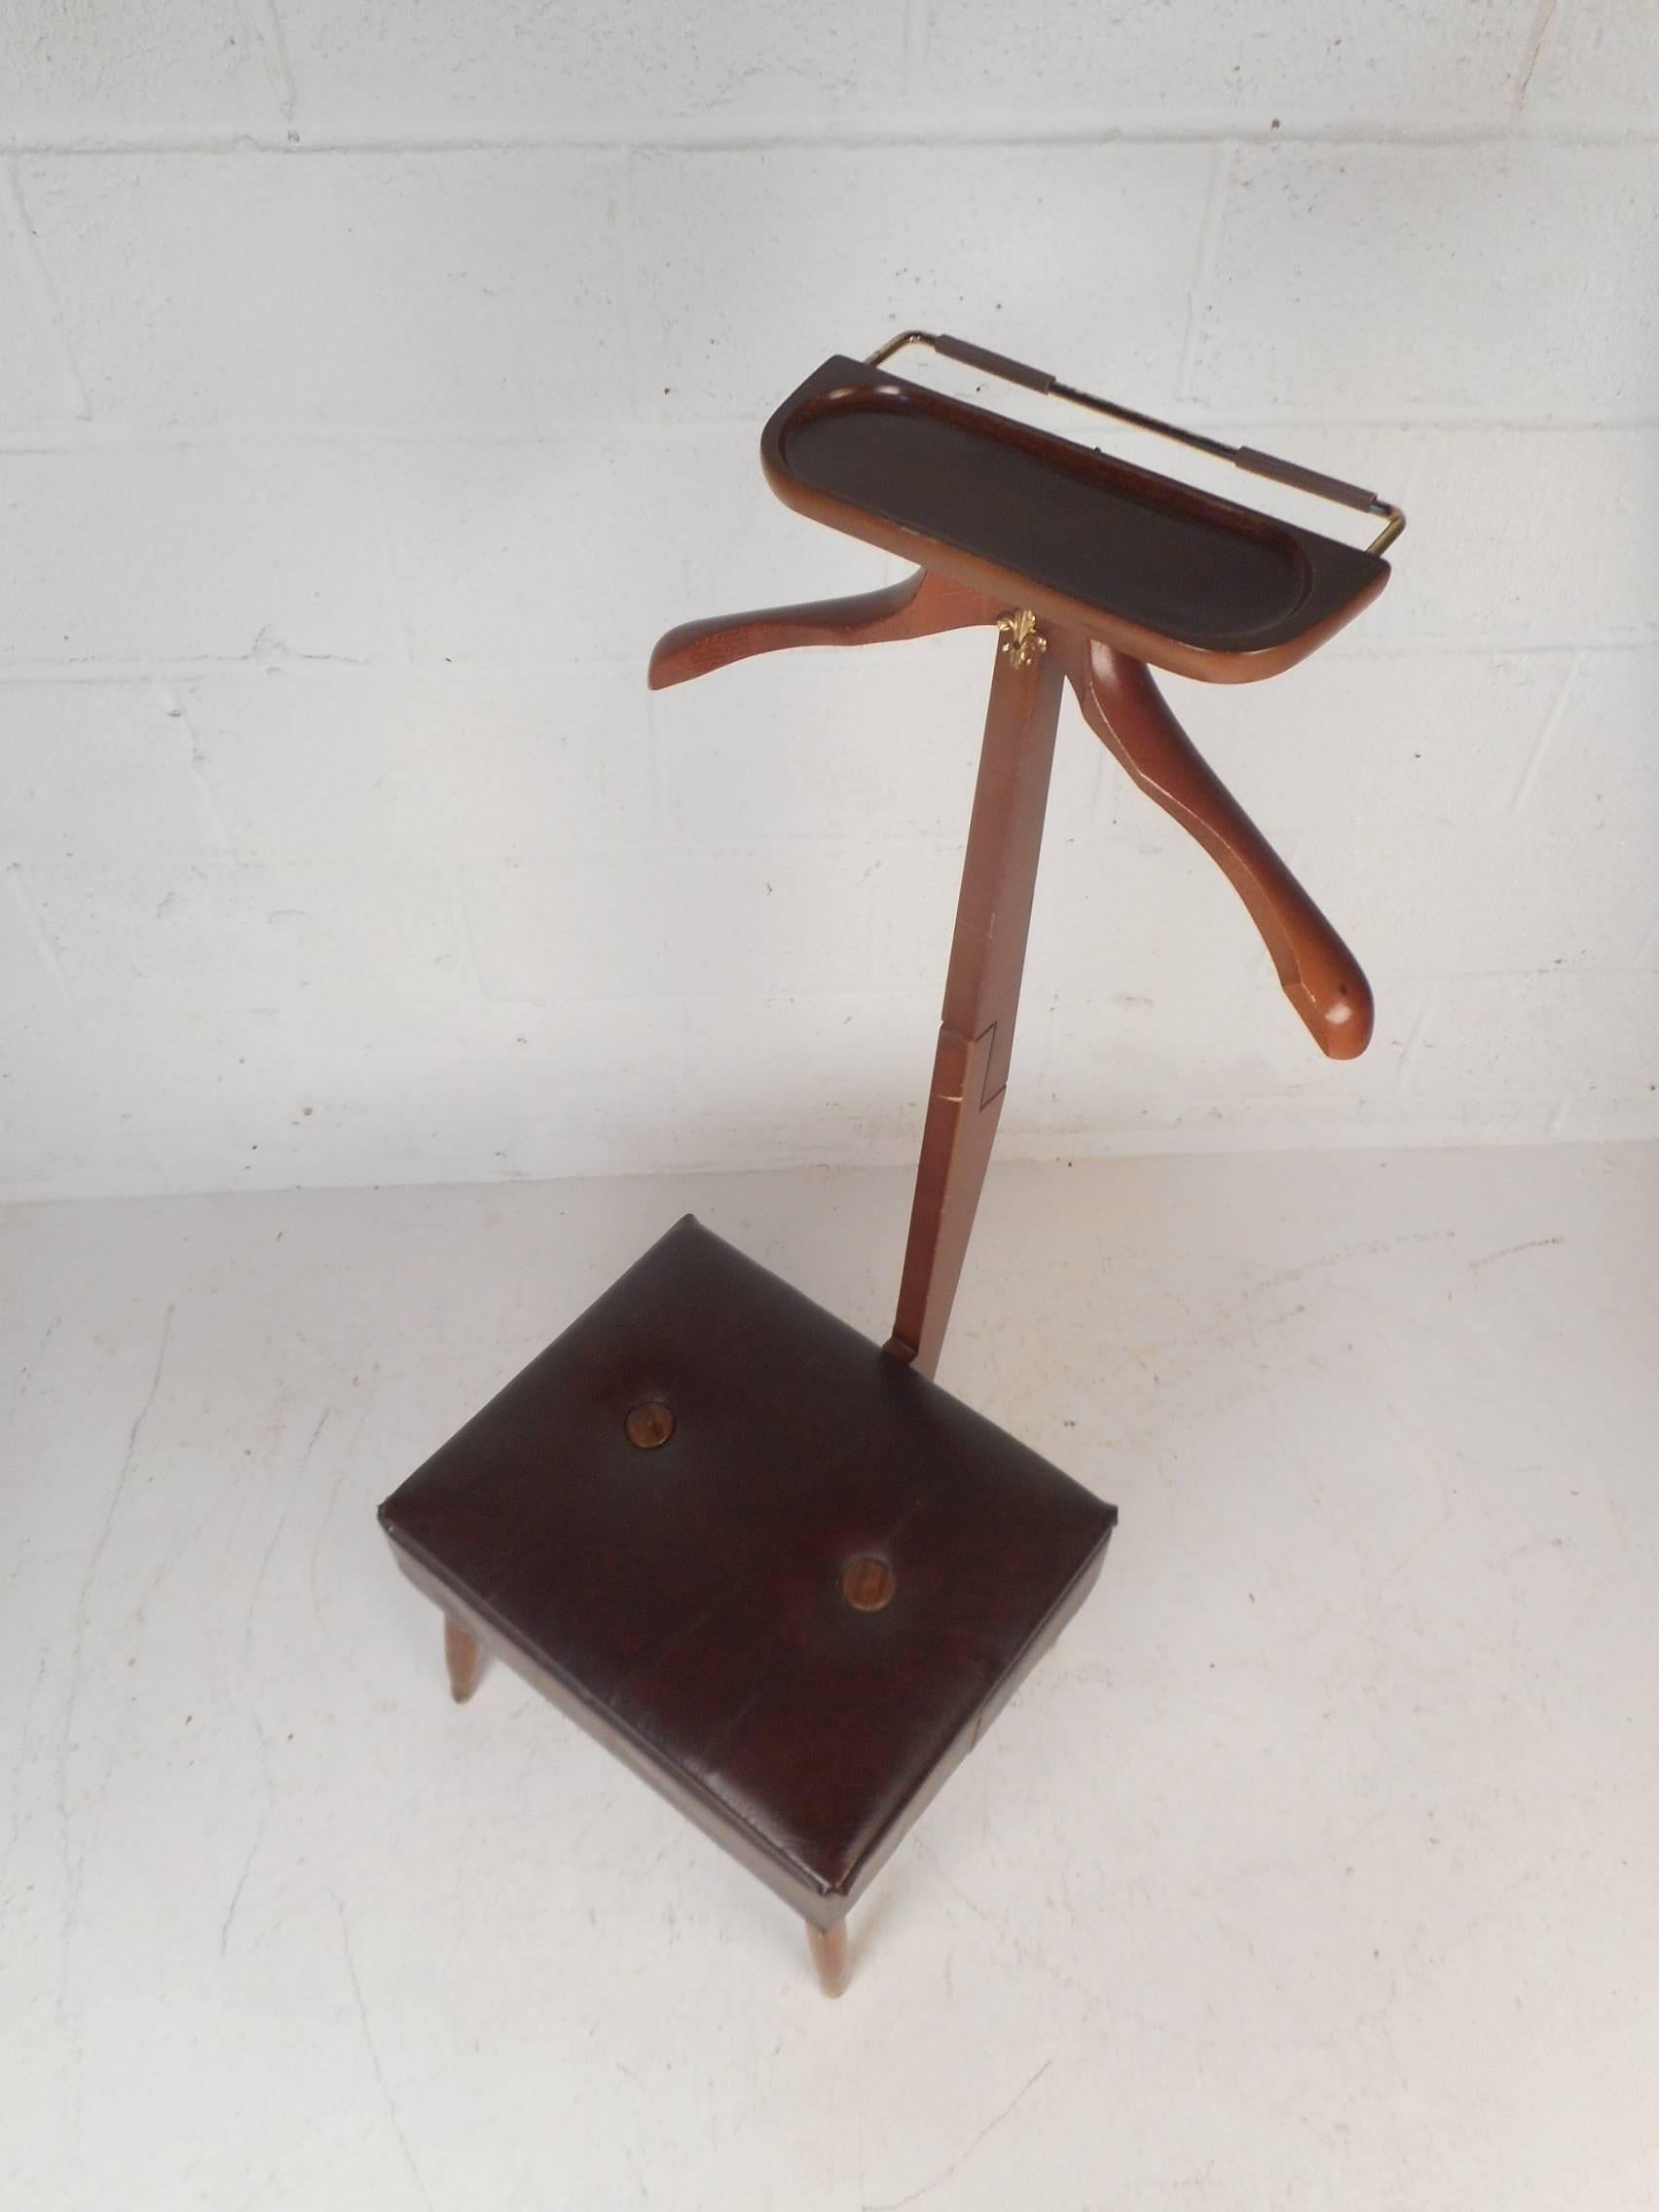 This beautiful vintage modern butler chair features a thick padded seat that opens up to unveil a large storage compartment. A sleek design with a hanger on the top for coats, a tray for small items, and a rod for ties. A thick padded seat covered